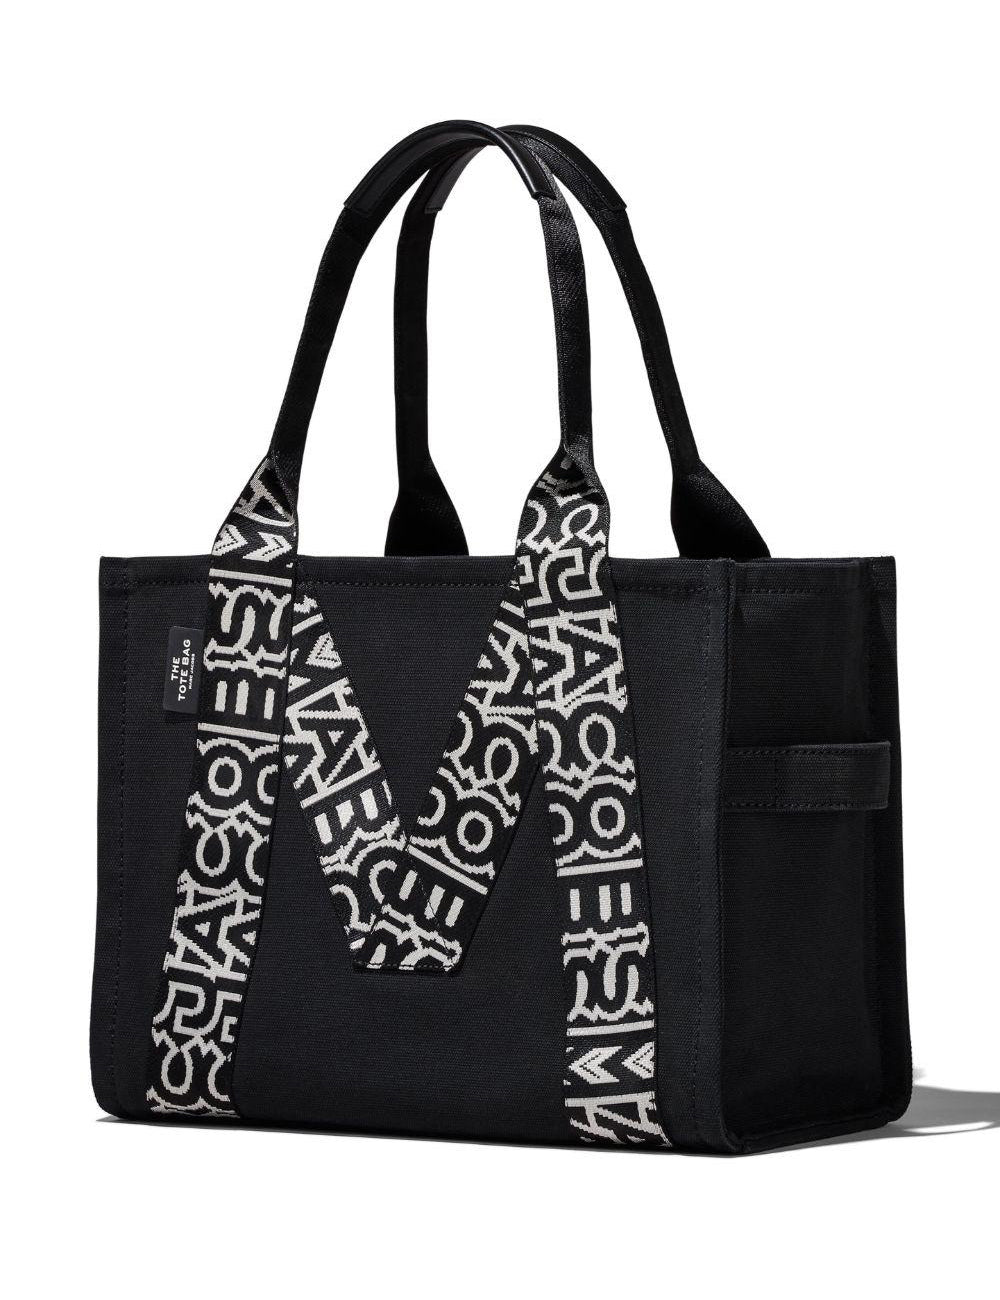 MARC JACOBS THE LARGE TOTE